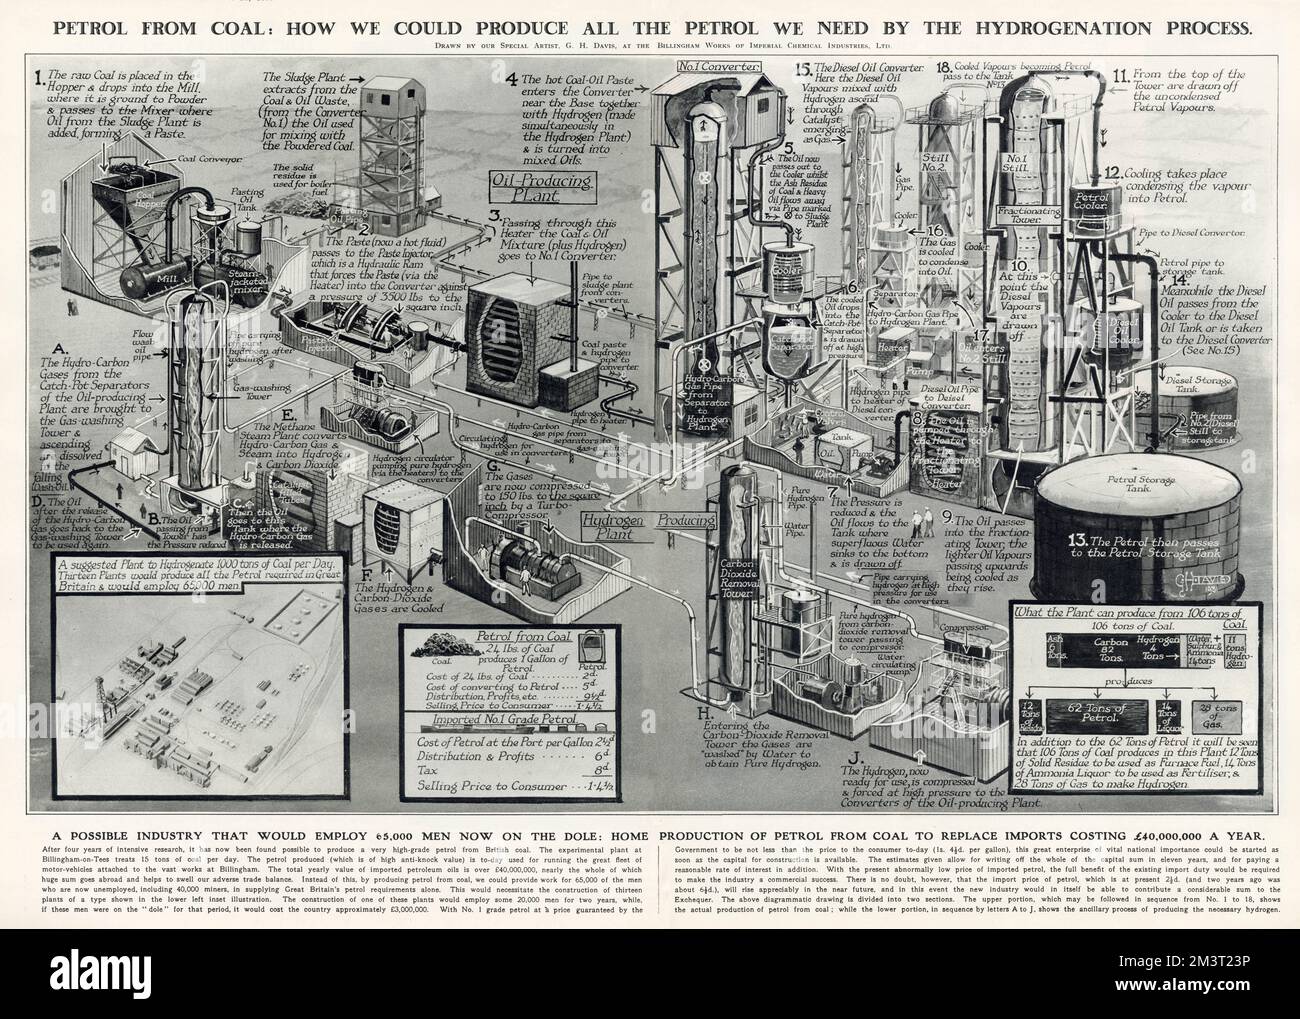 Generating petrol from coal using the Hydrogenation process. Illustration by G H Davis of the Stock Photo